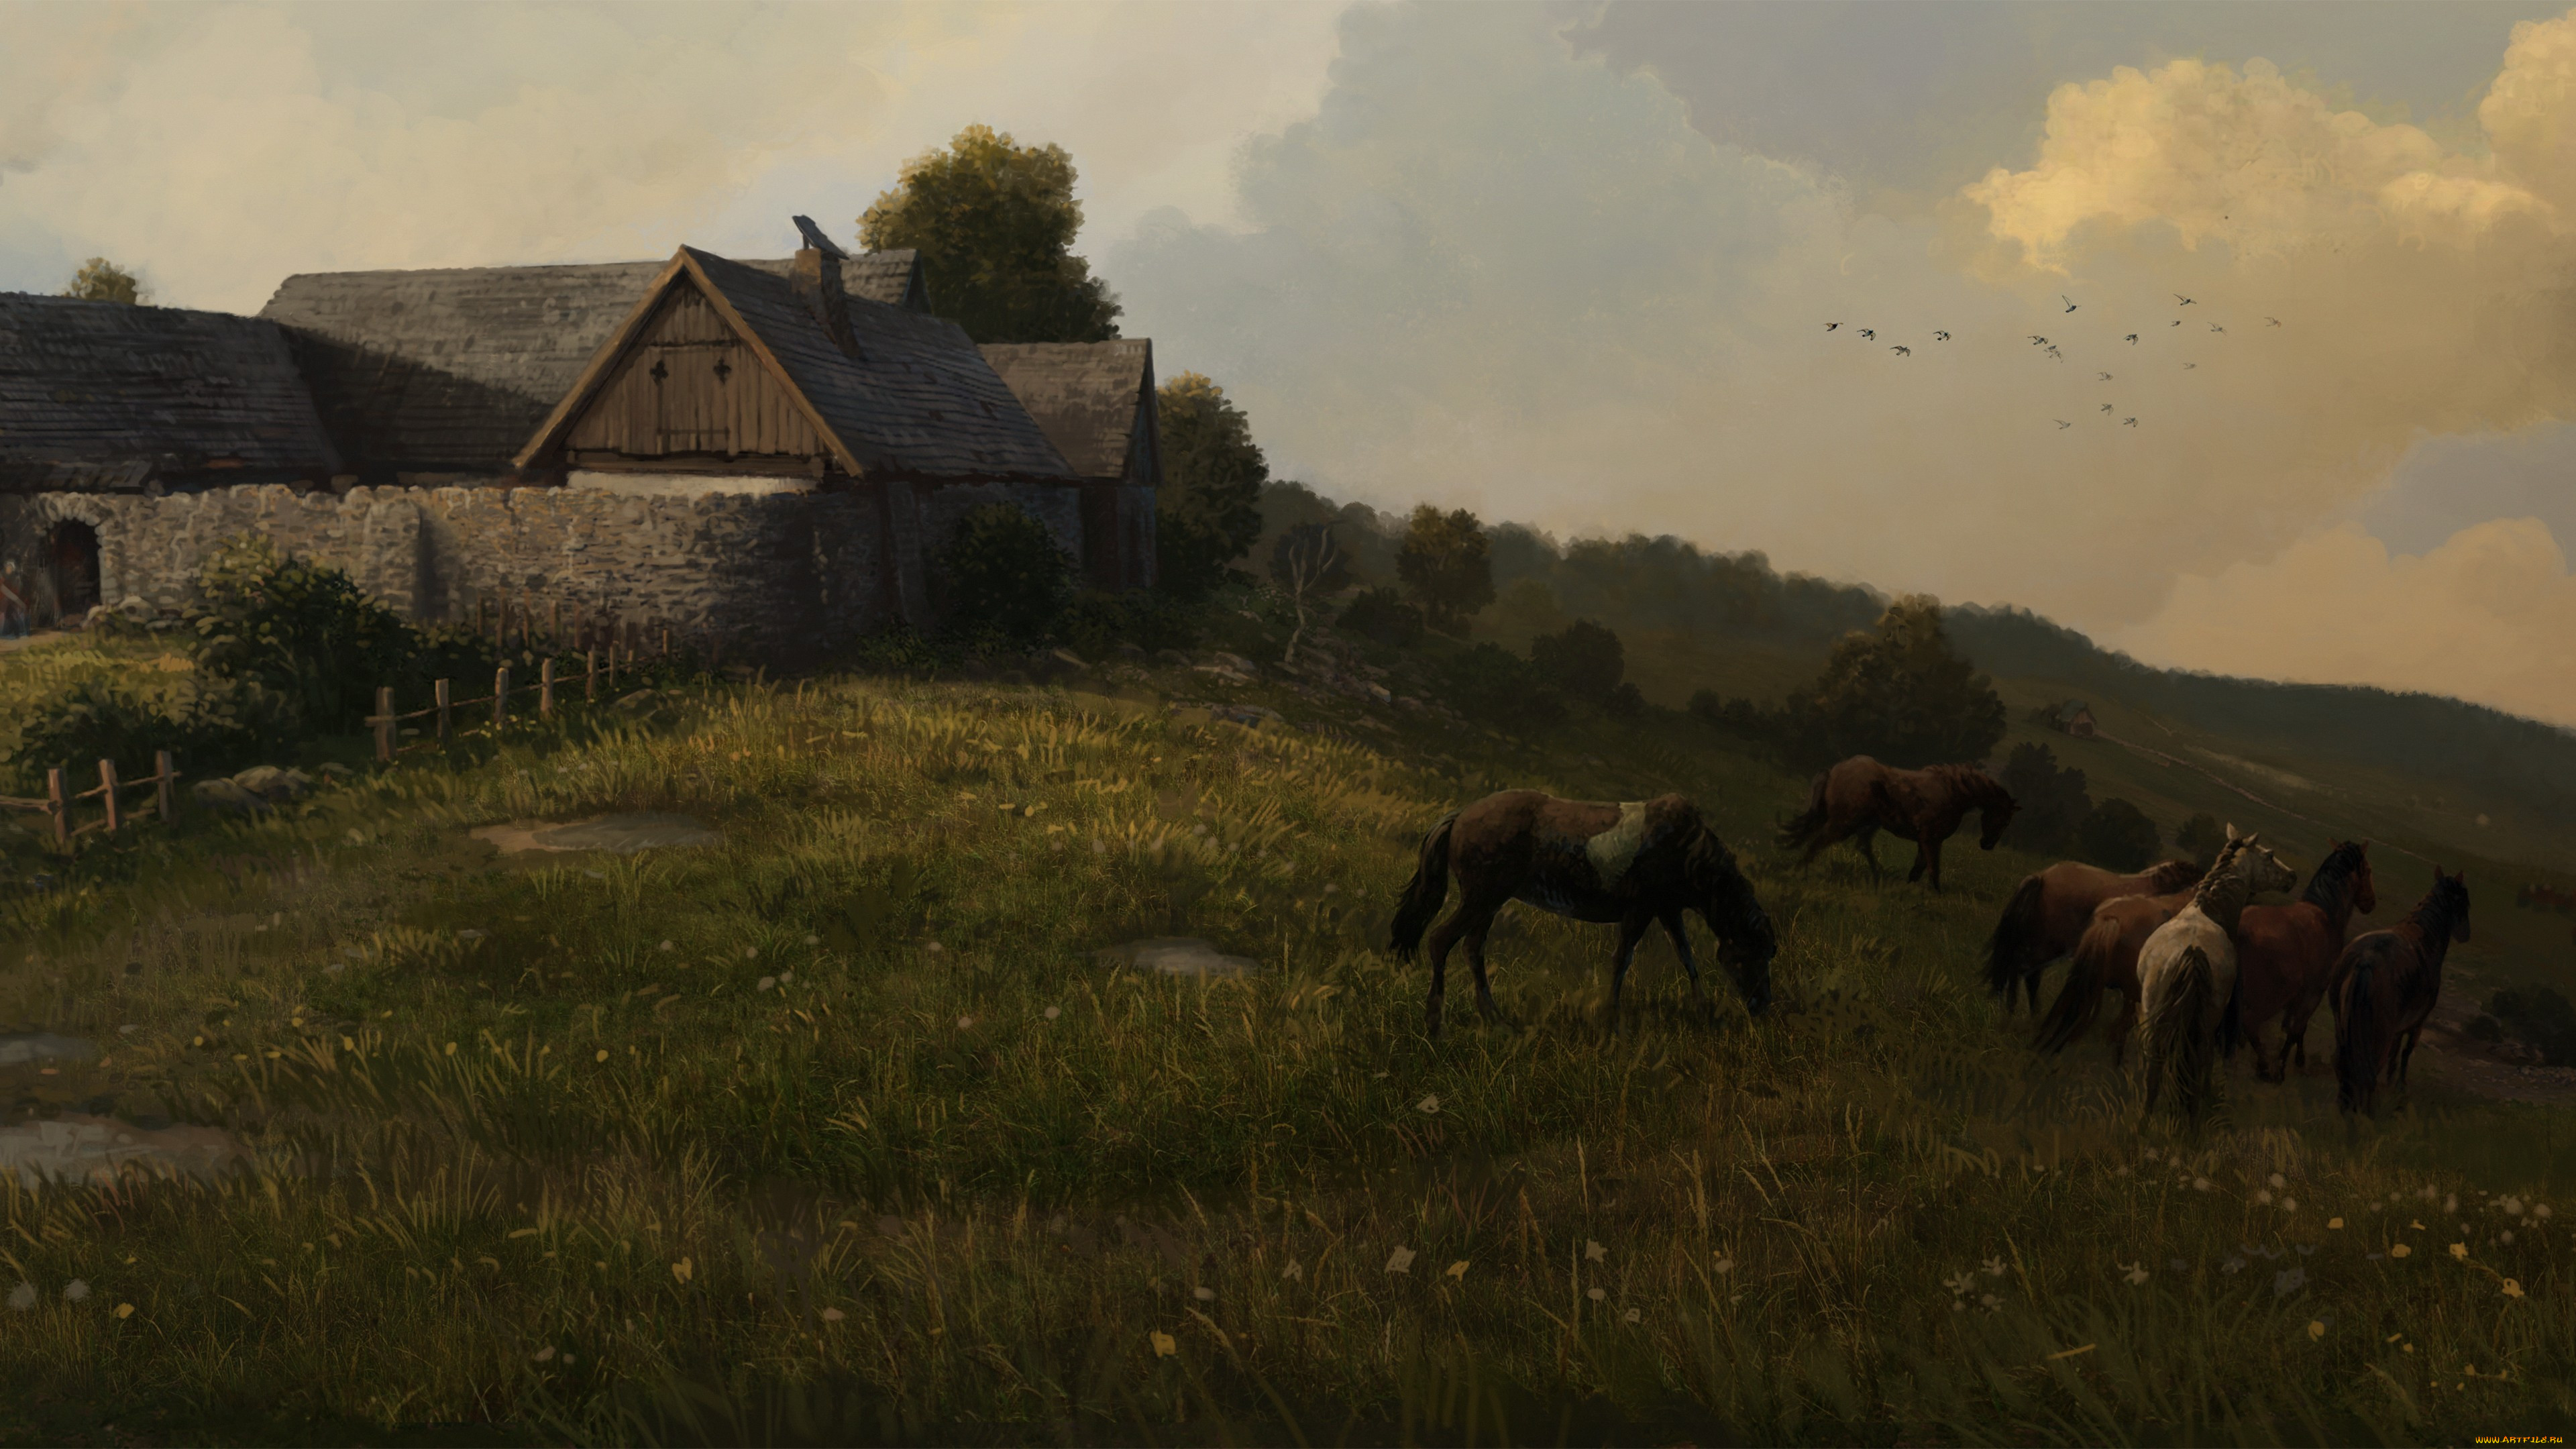  , kingdom come,  deliverance, kingdom, come, deliverance, , action